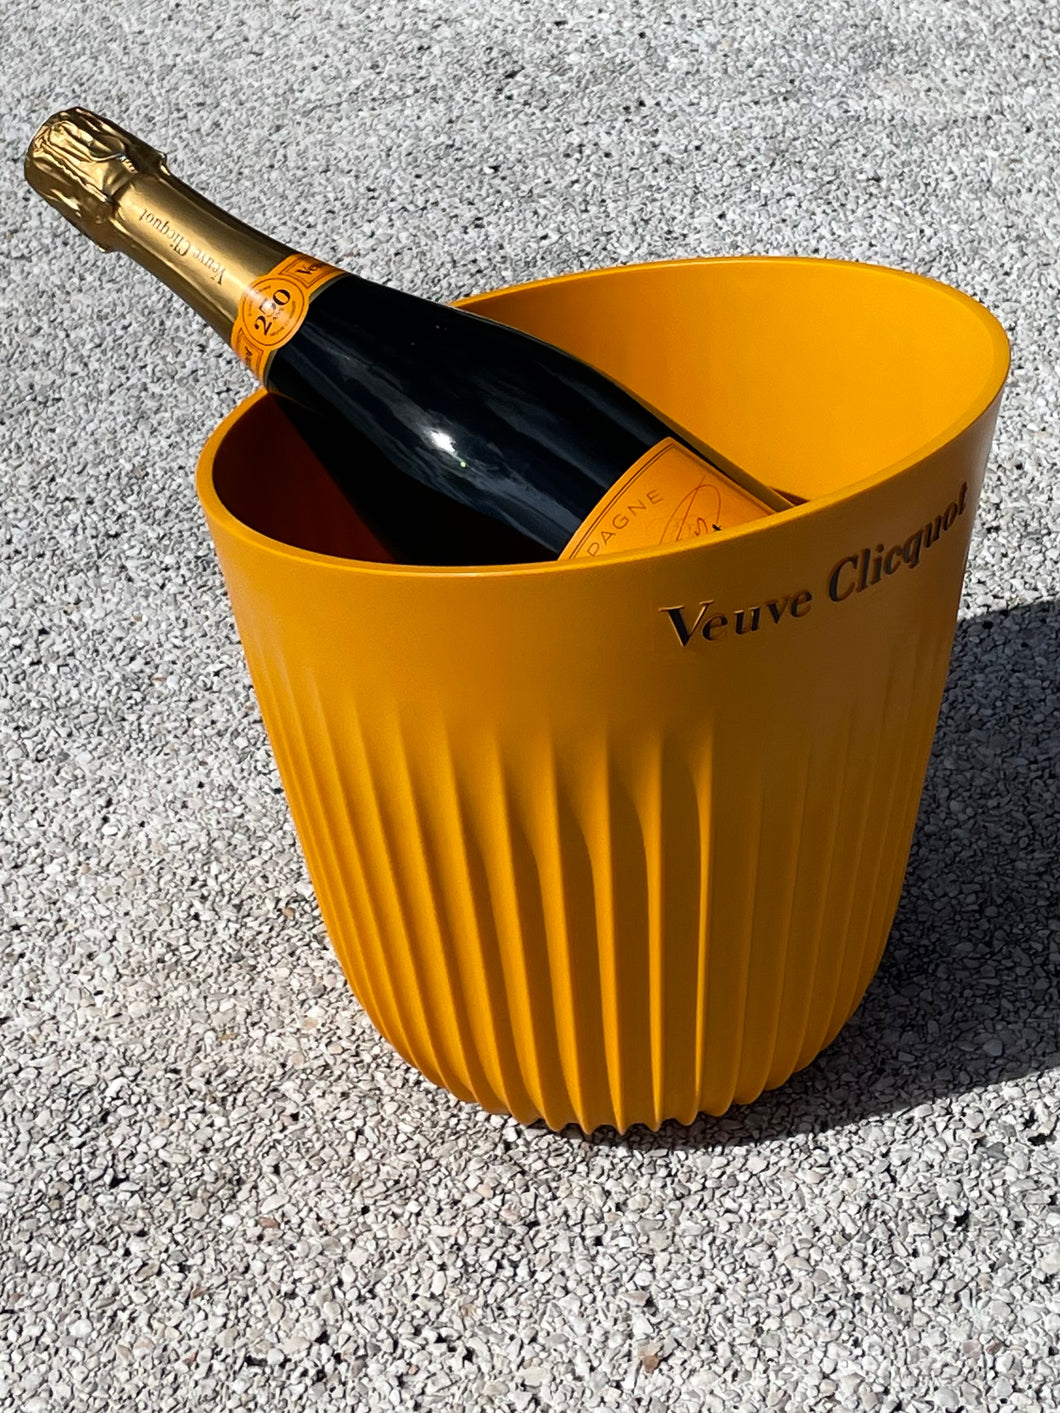 VEUVE CLICQUOT ICE BUCKET 100 % RECYCLED MATERIALS